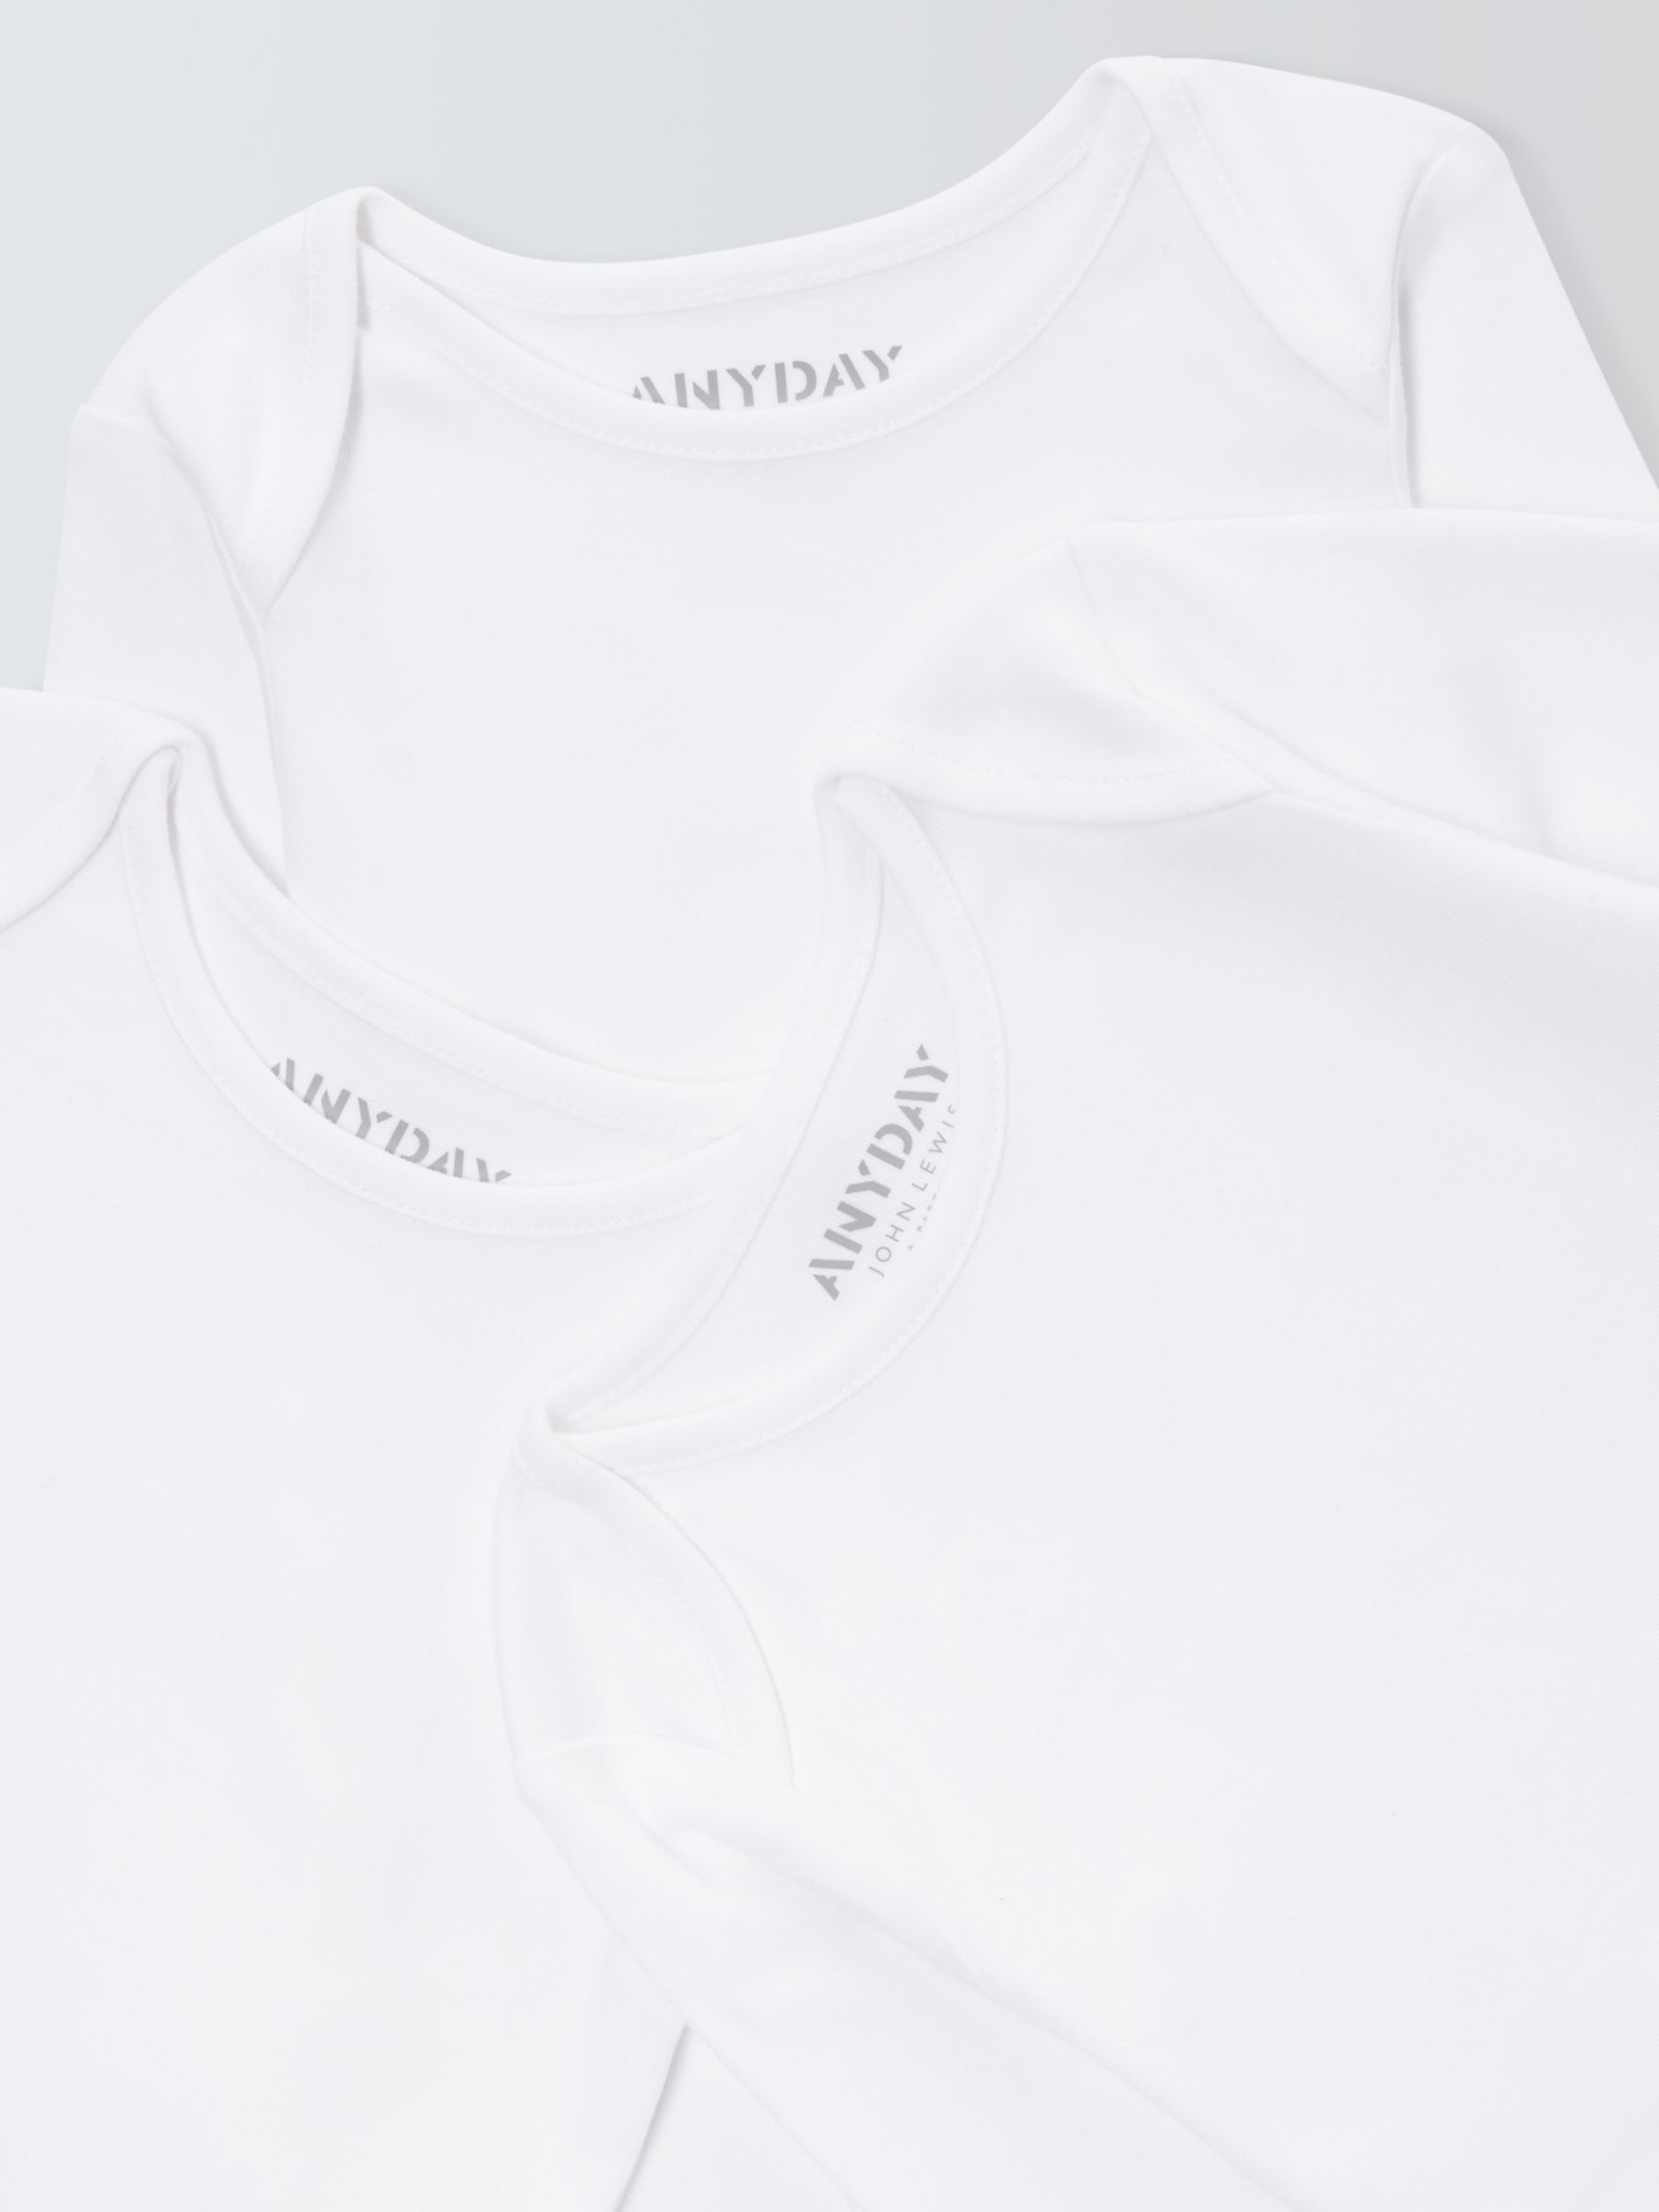 John Lewis ANYDAY Baby Long Sleeve Bodysuit, Pack of 7, White, Early Baby